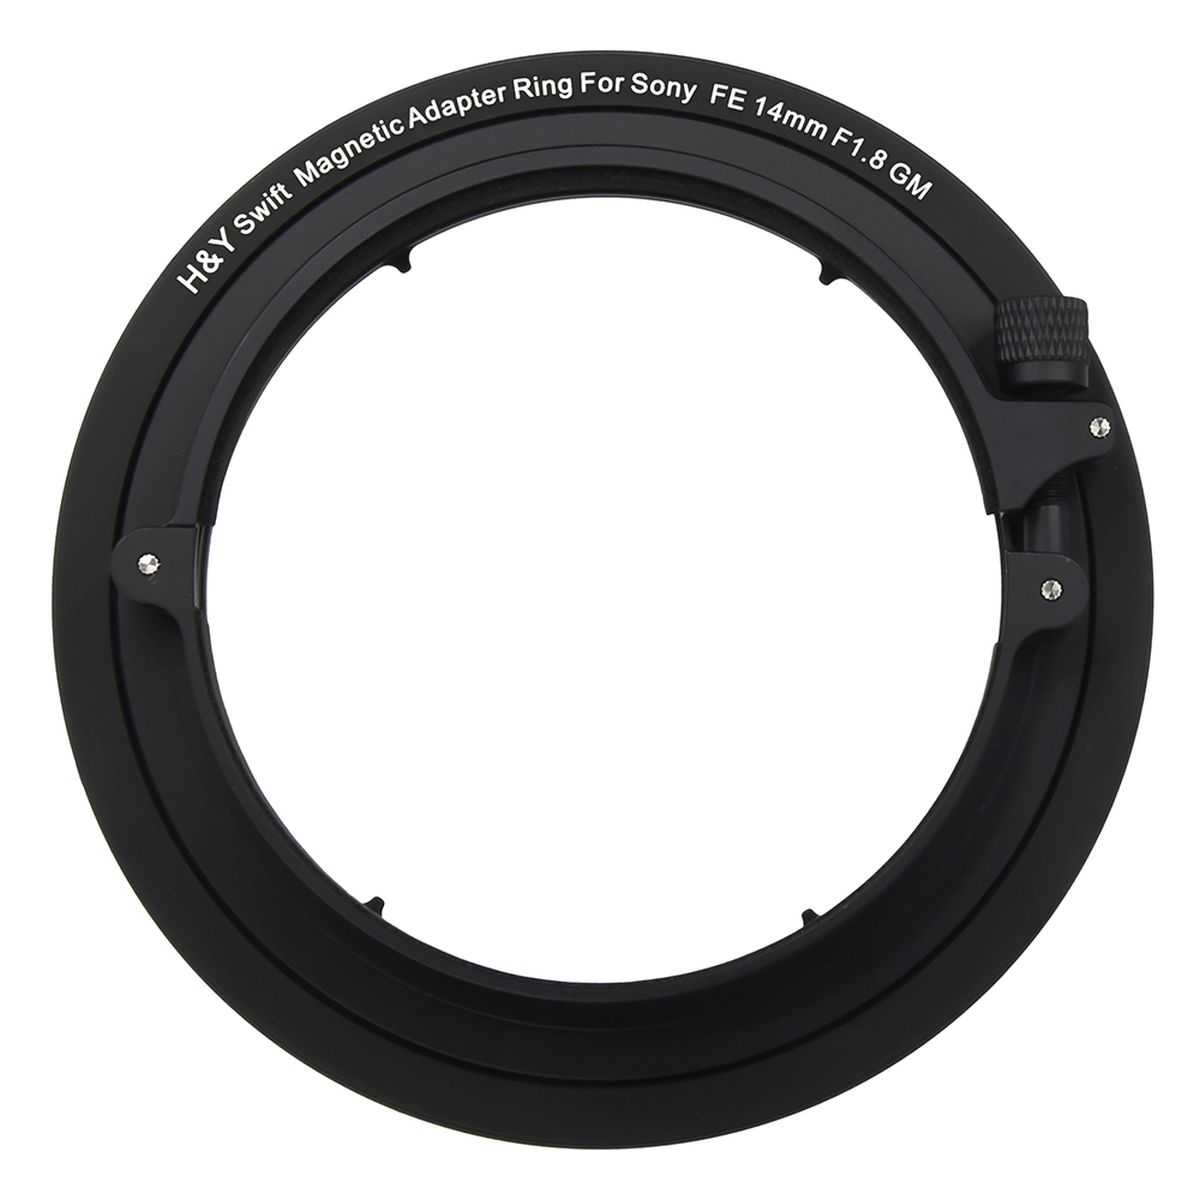 H&Y Swift A Sony 1,8/14mm Adapter magnetisch